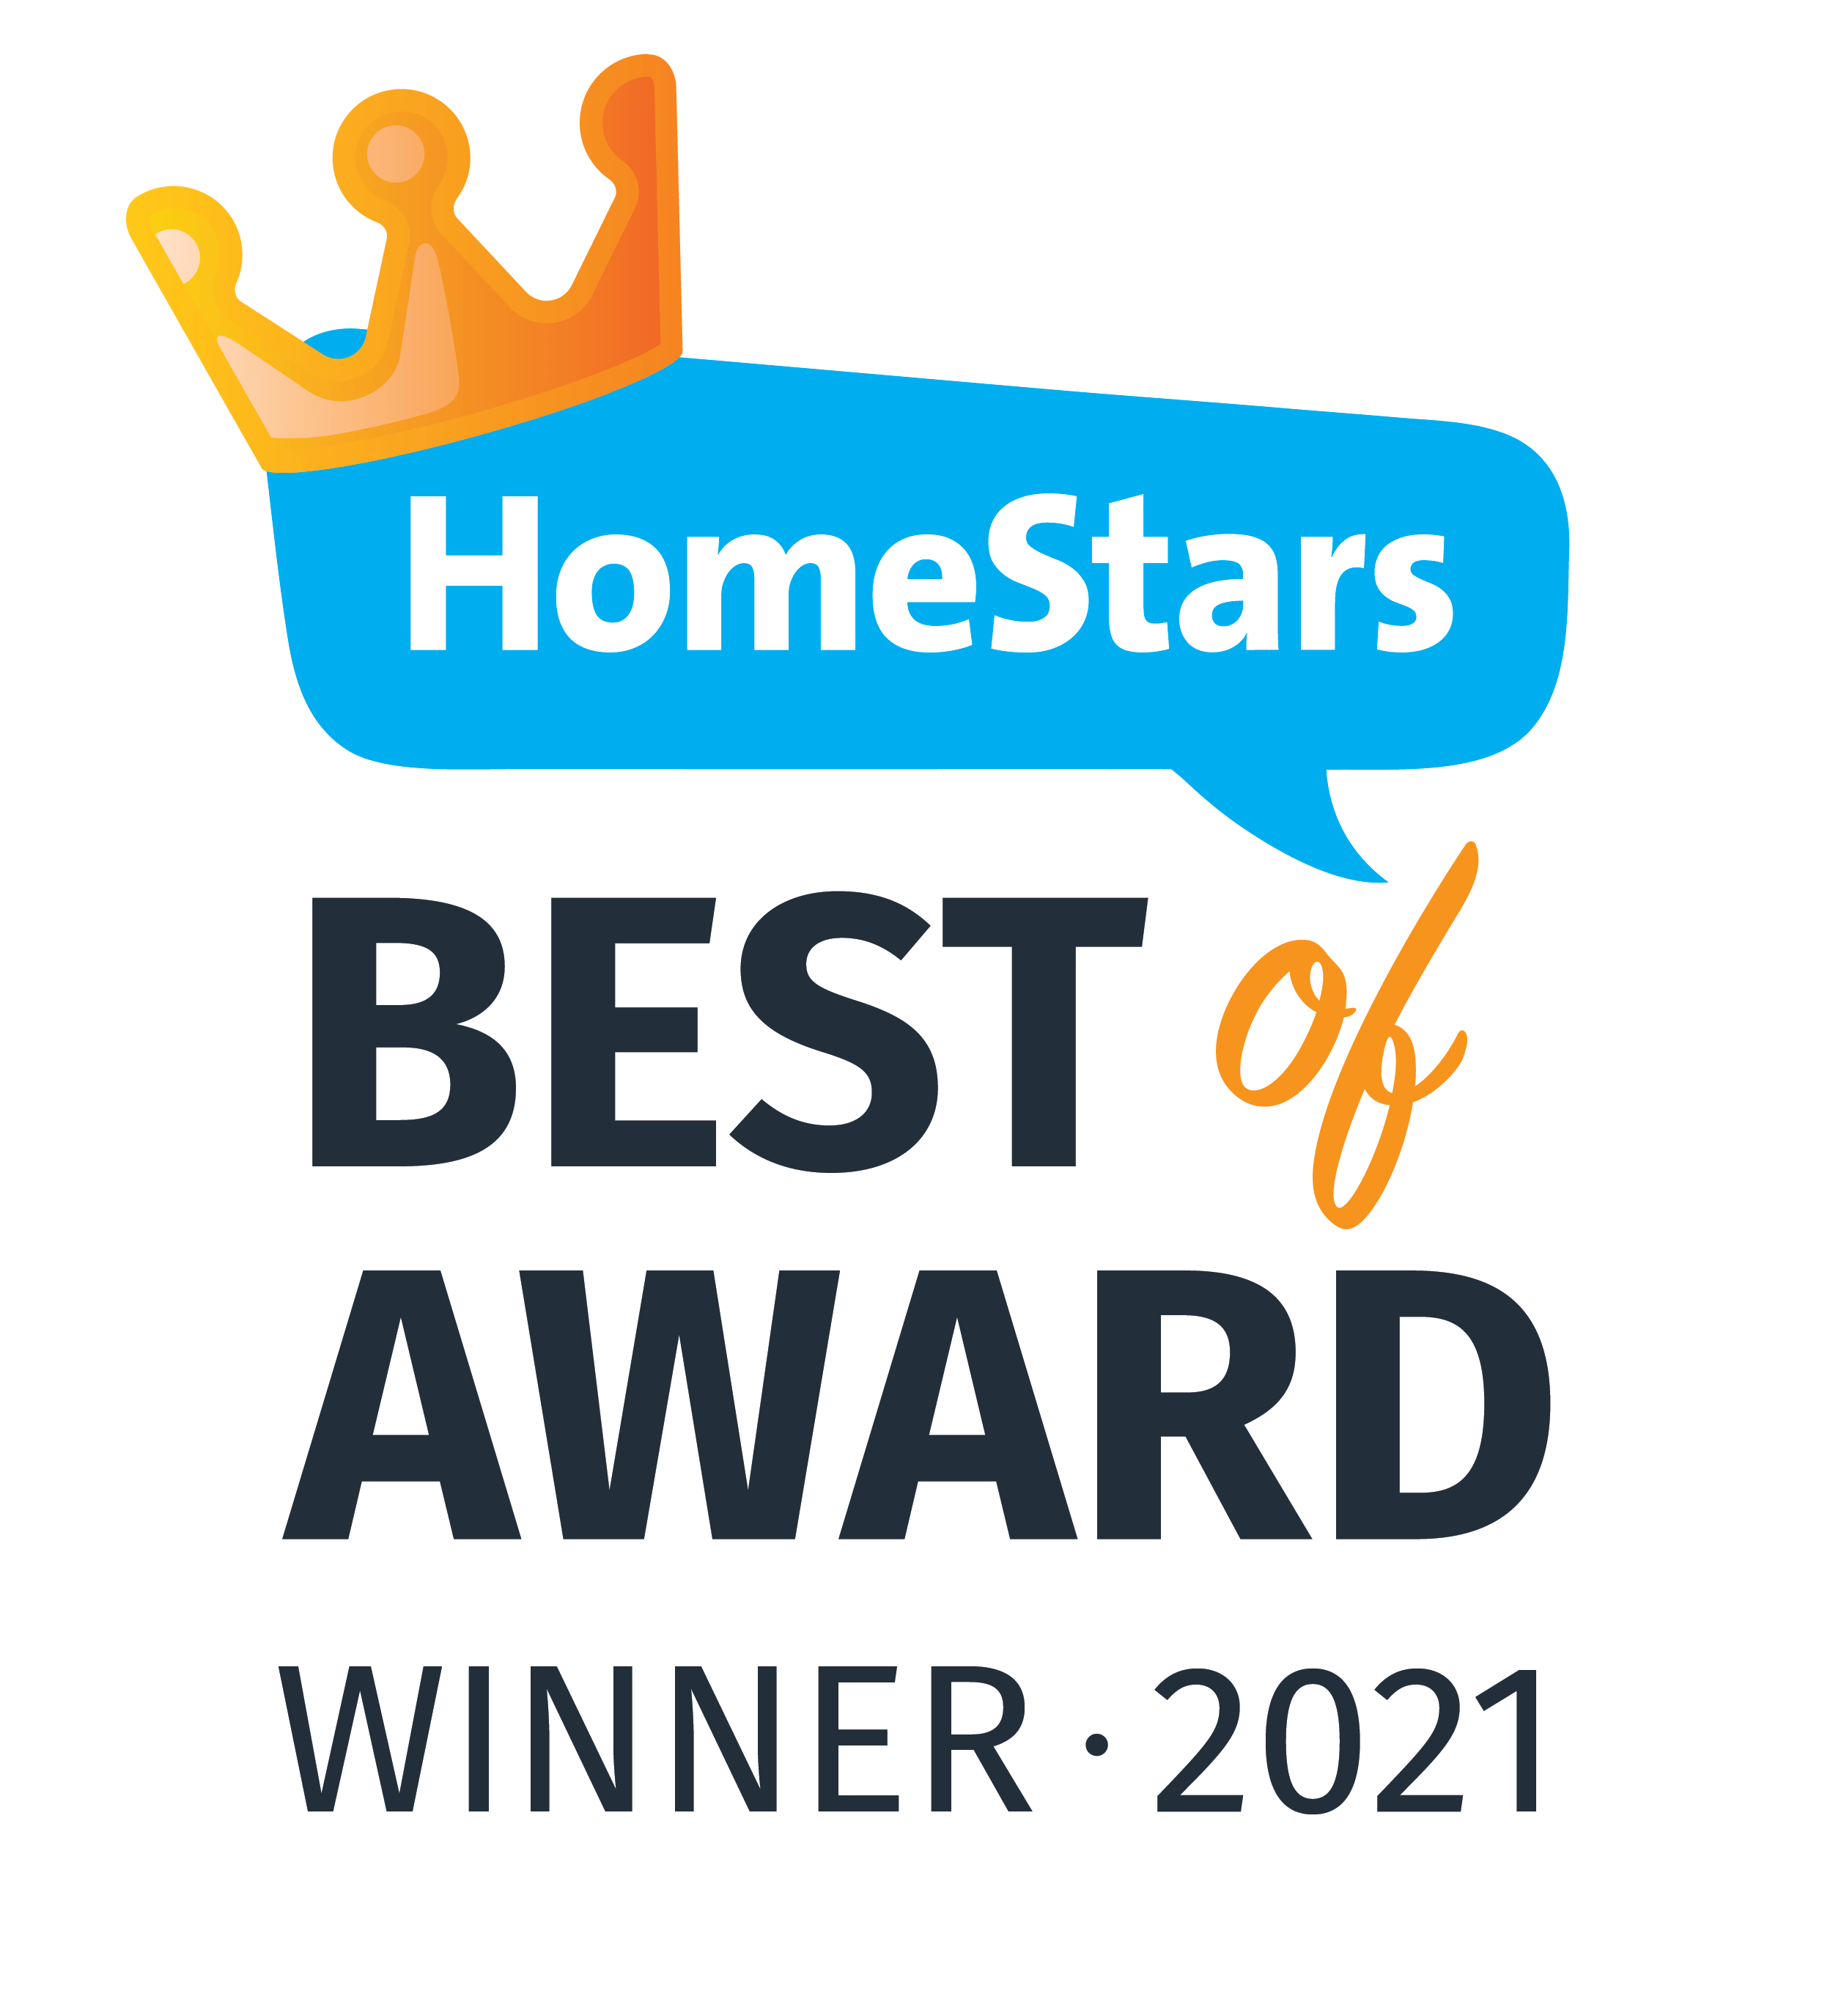 Homestars Best of the best winner -2021 for our Toronto Painting Services.